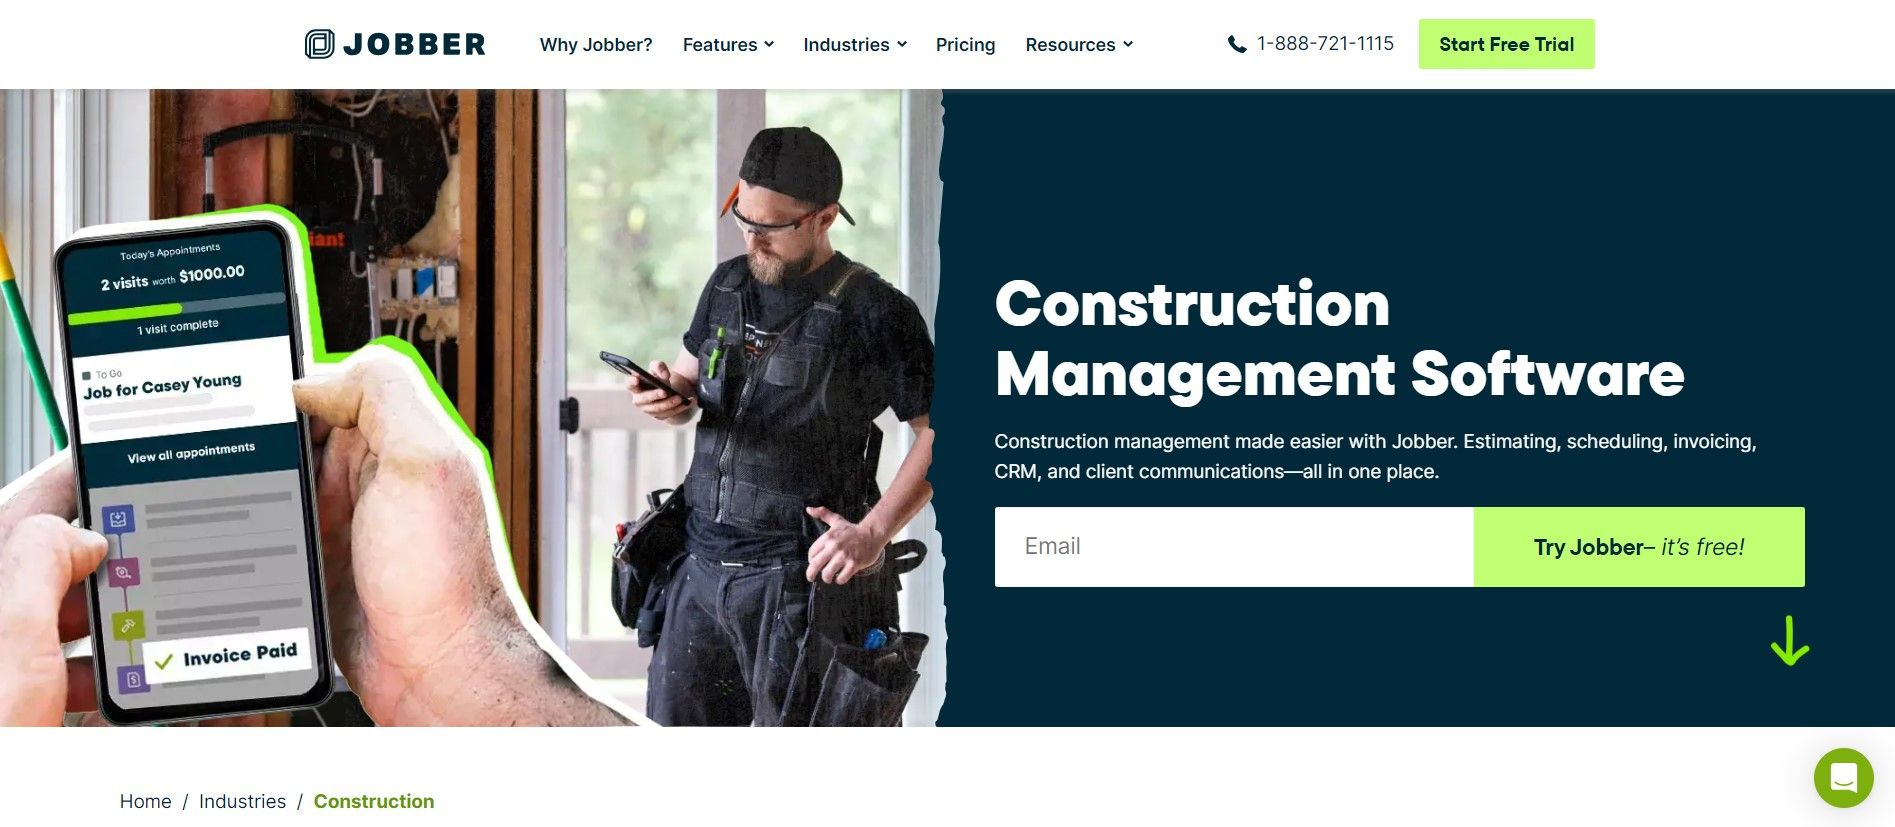 Jobber (prominent construction field management software) homepage showing a builder looking at his mobile